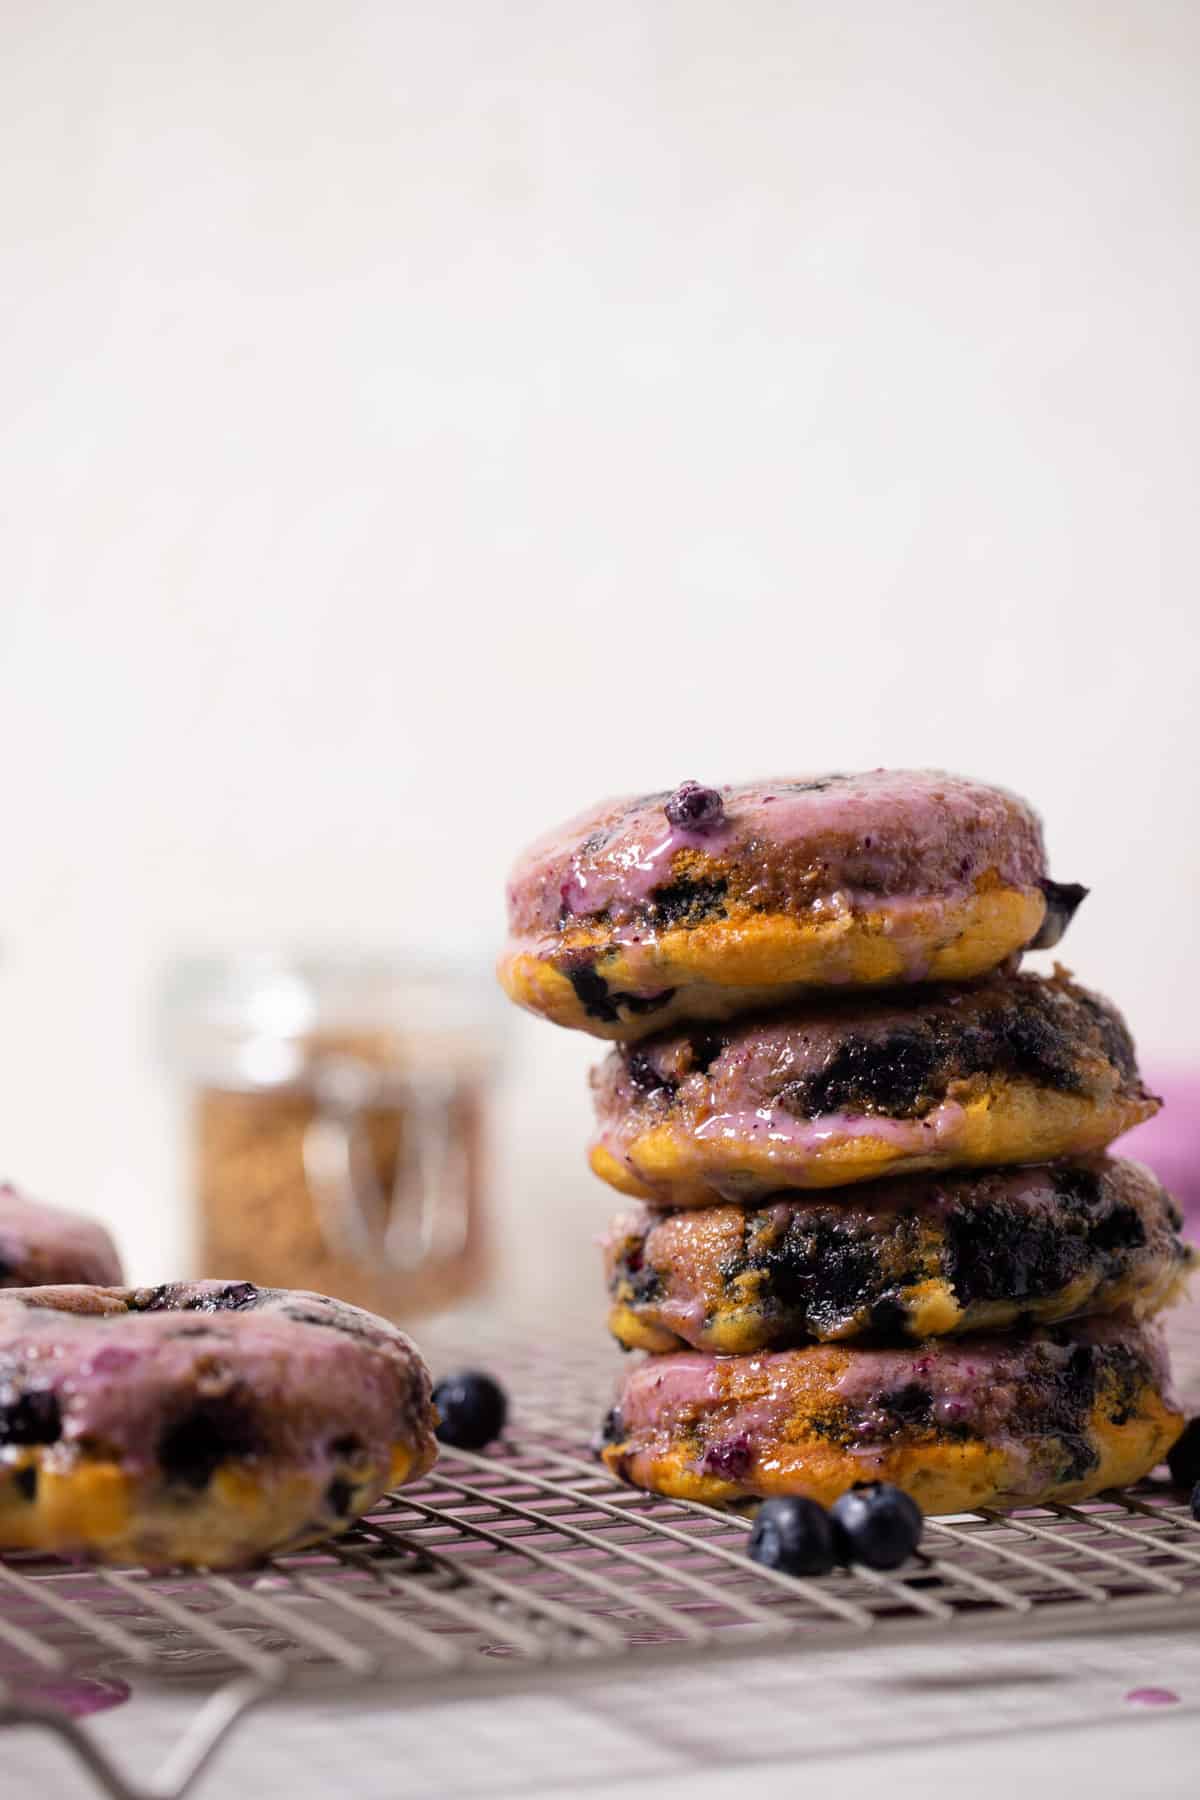 Stack of Blueberry Vegan Donuts with Blueberry Glaze.